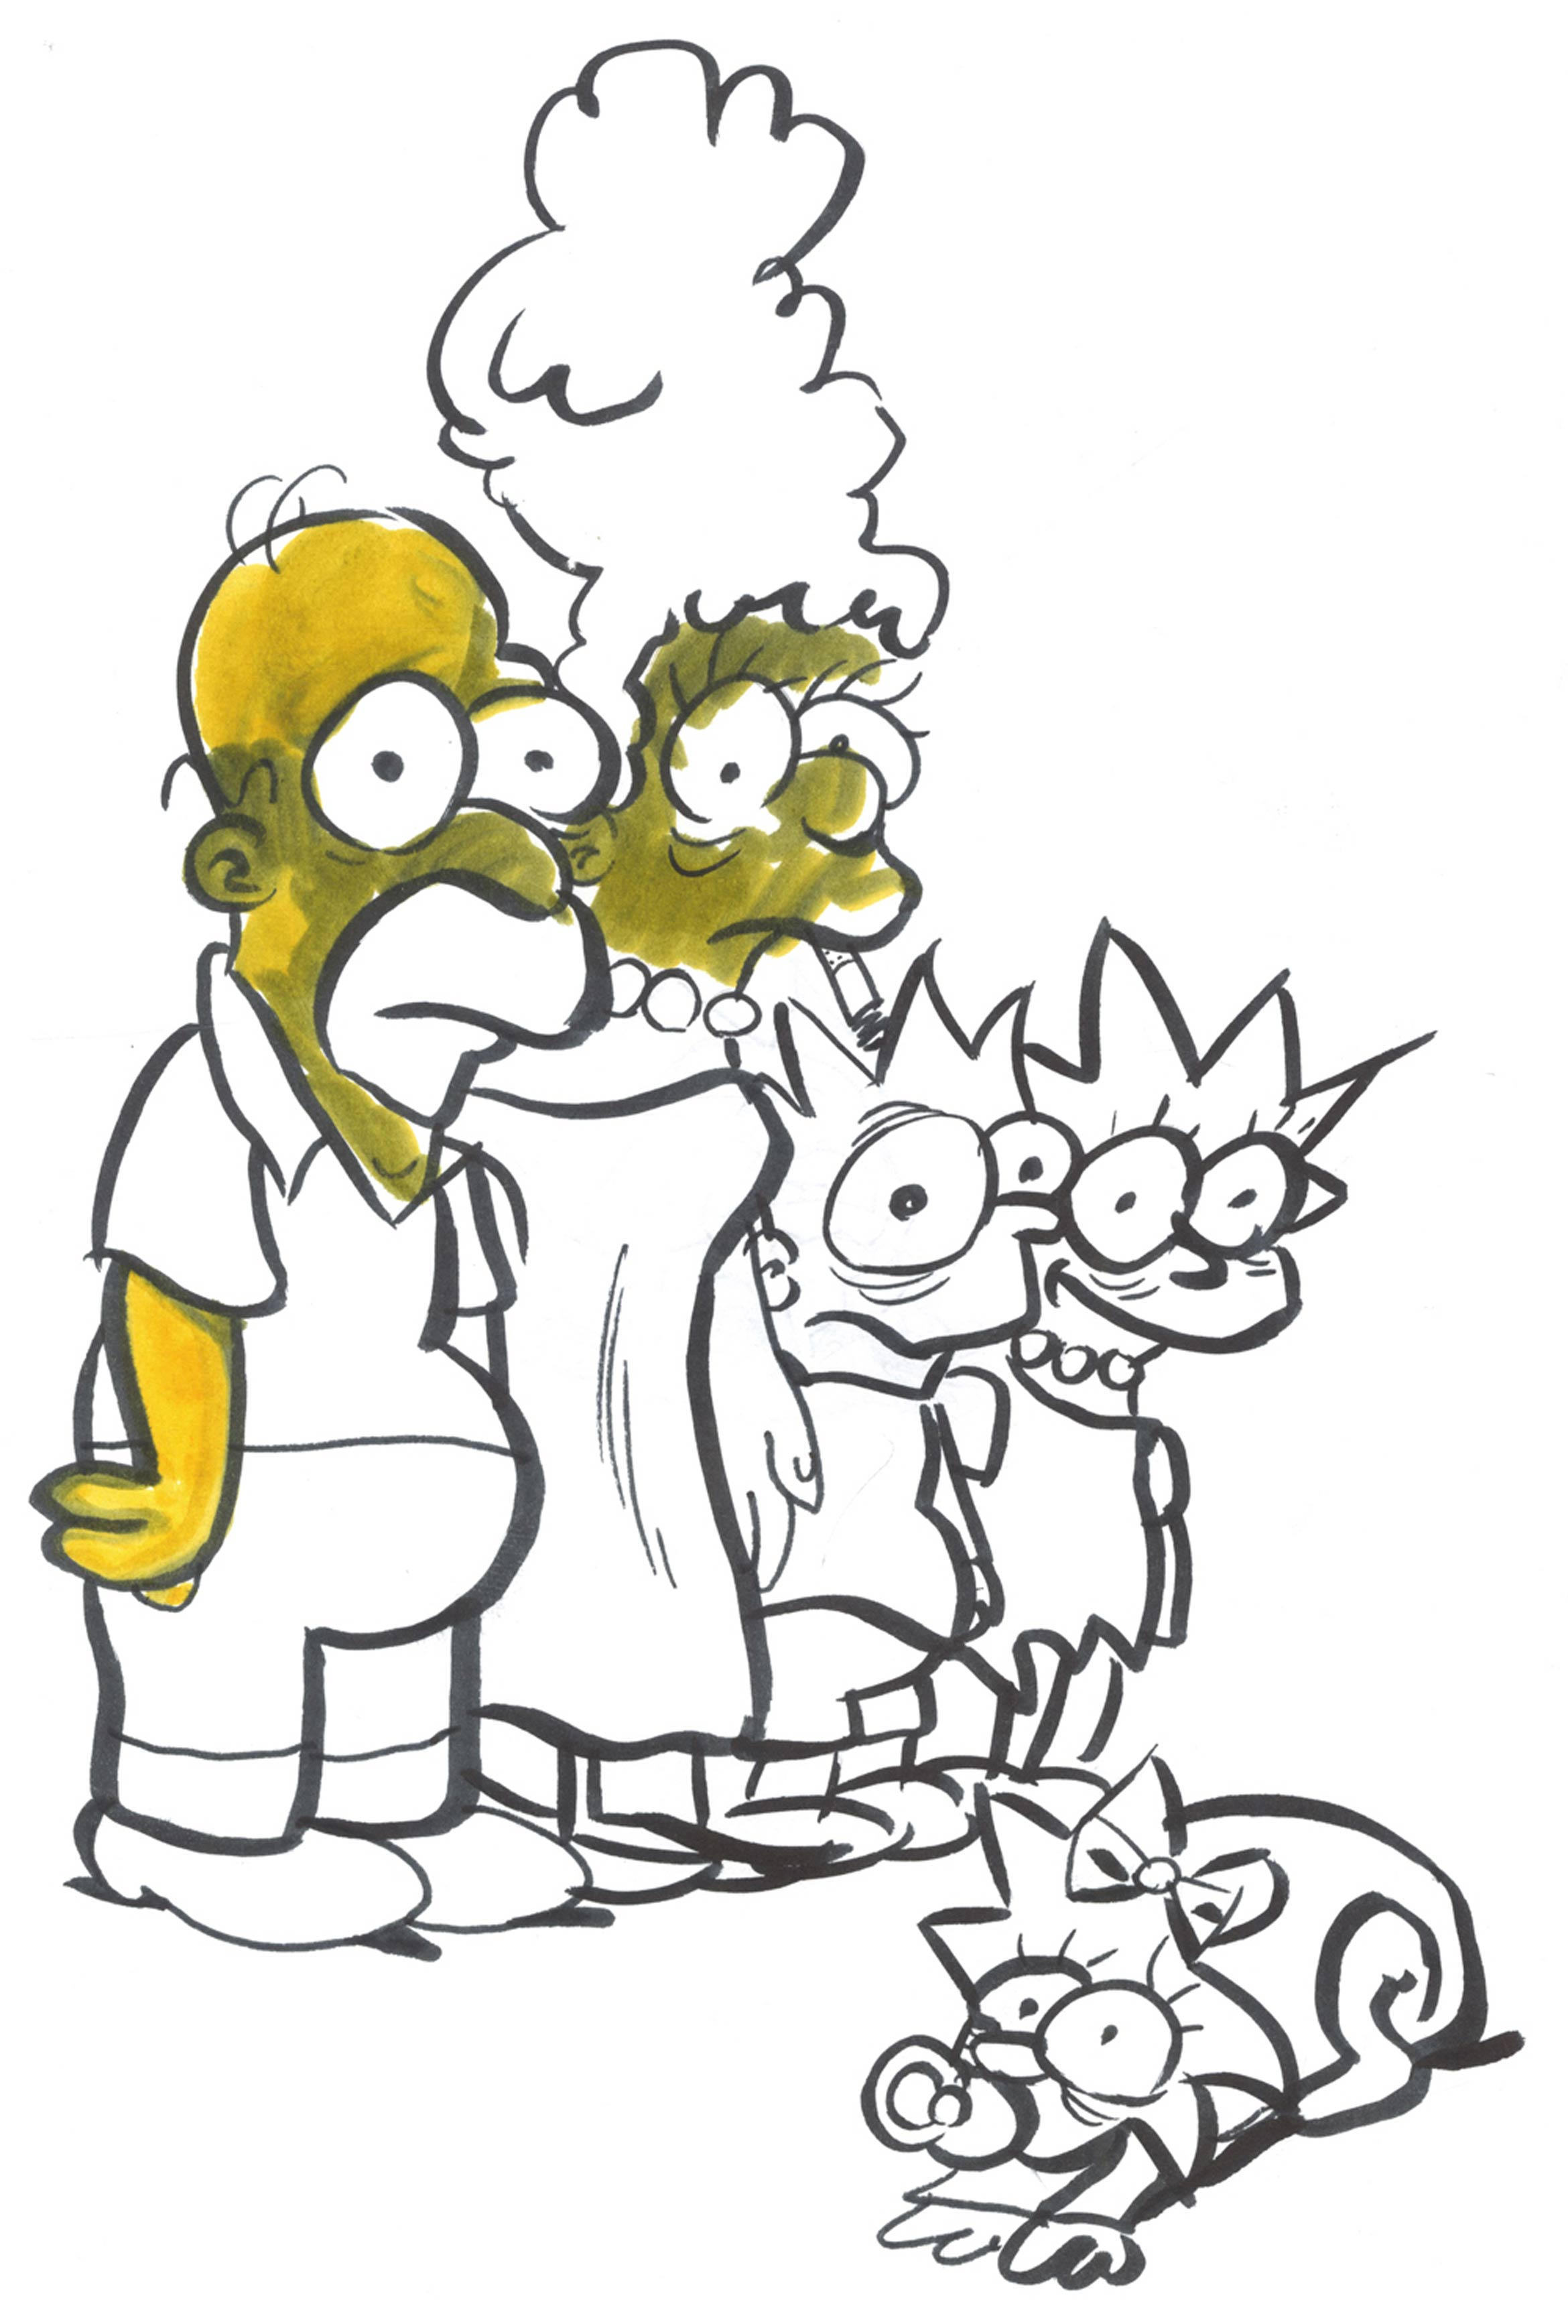 thierry-jaspart-when-a-child-simpsons